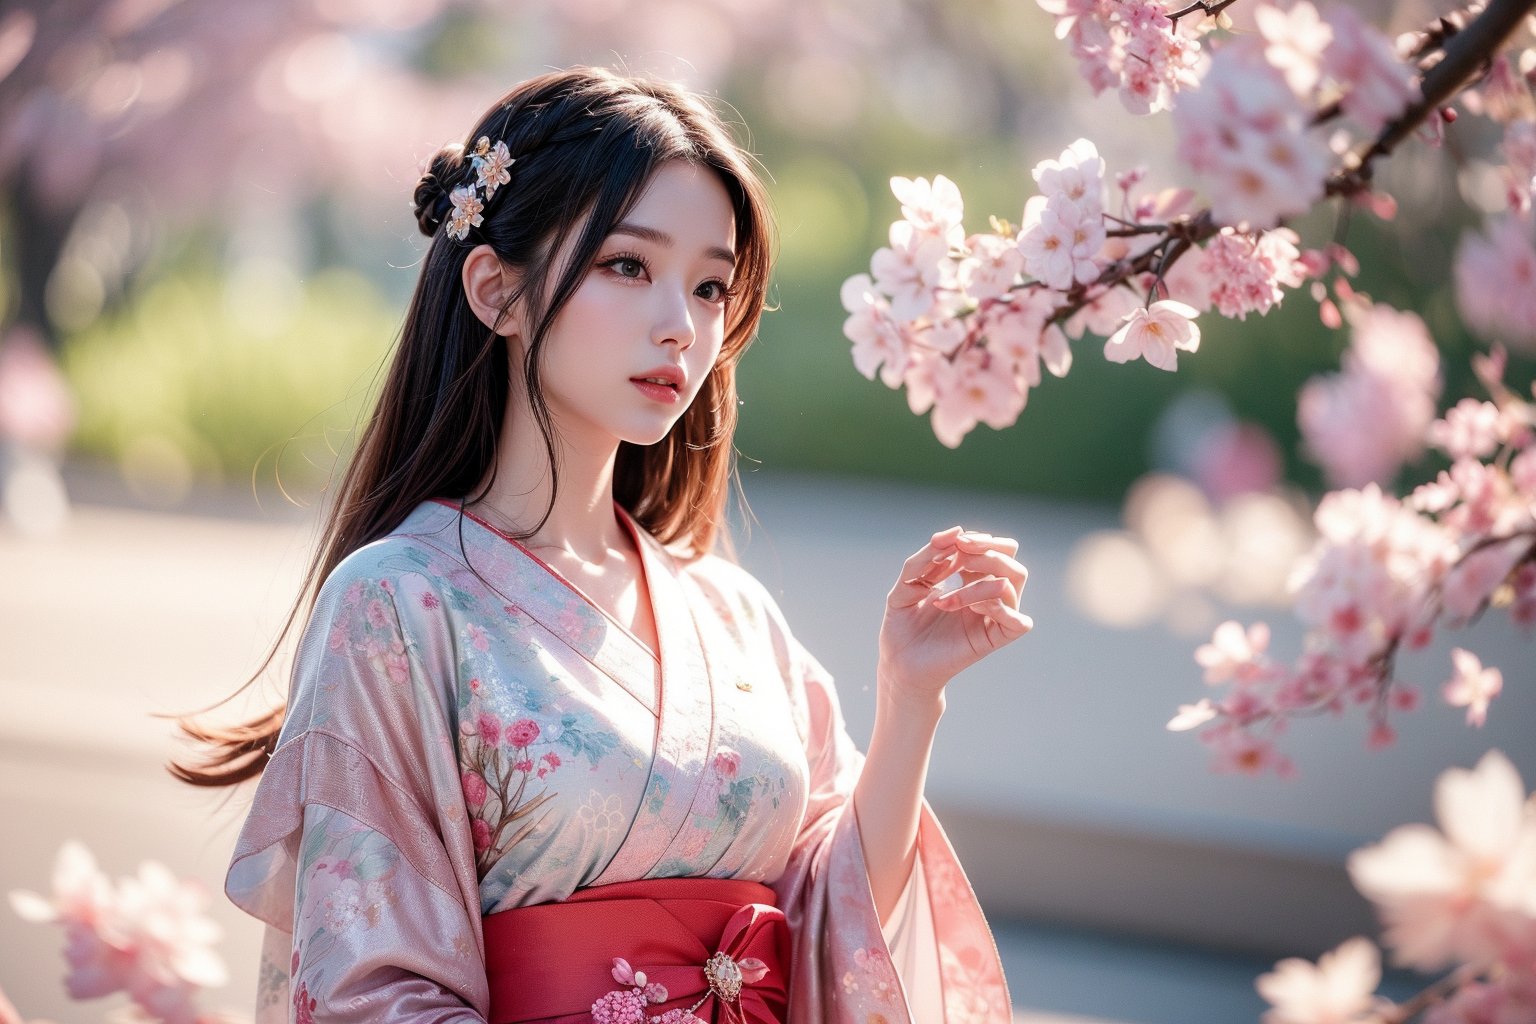 This image uses a surrealist art style and may have been created by several artists. The painting depicts a woman in traditional Japanese clothing standing among blooming cherry blossom trees. The focus of the composition is her graceful posture, with petals falling around her as she reaches upward. The background is filled with bright pink flowers, rainbows, and soft glow through the tree branches. Her kimono has a delicate floral design and her hair is adorned with matching flowers. This scene creates a sense of tranquility and harmony with nature. Other figures and elements are blurred to ensure that the woman is the focus of the image.